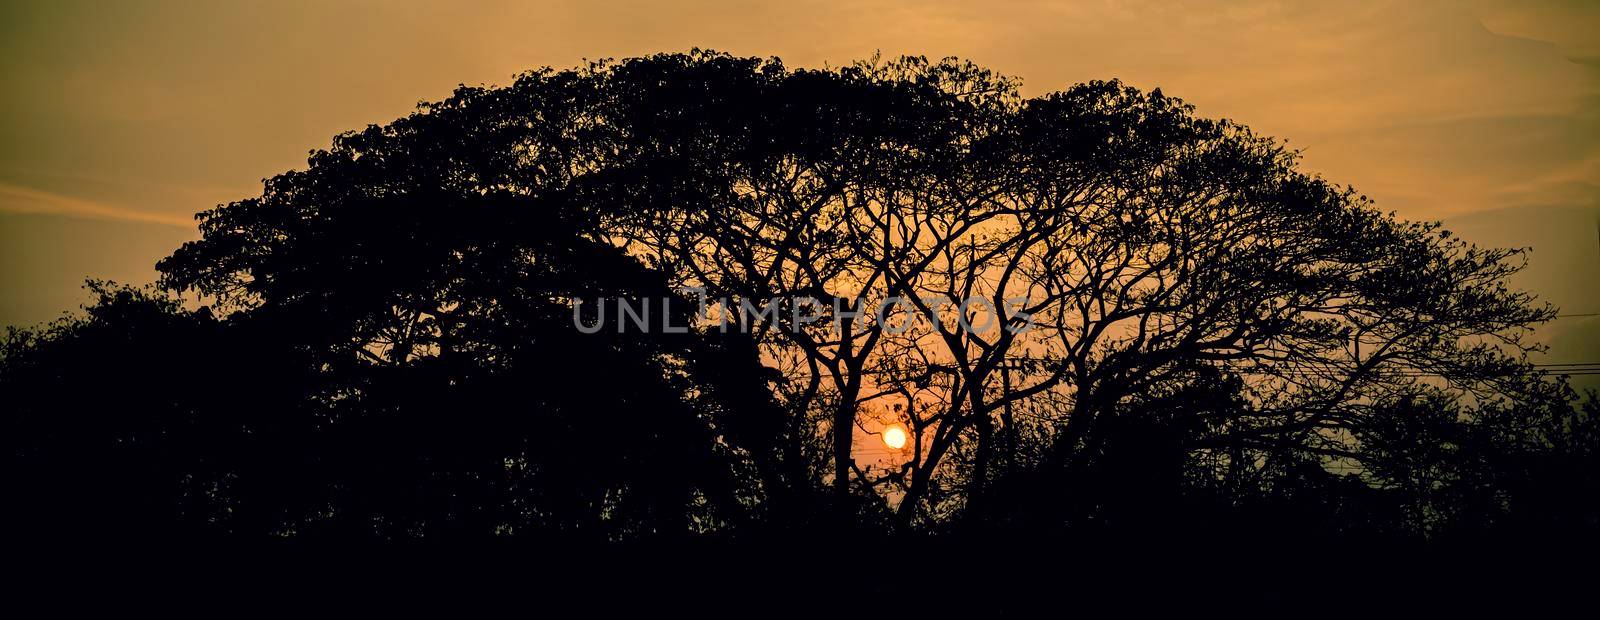 tree silhouette at sunset by Petrichor